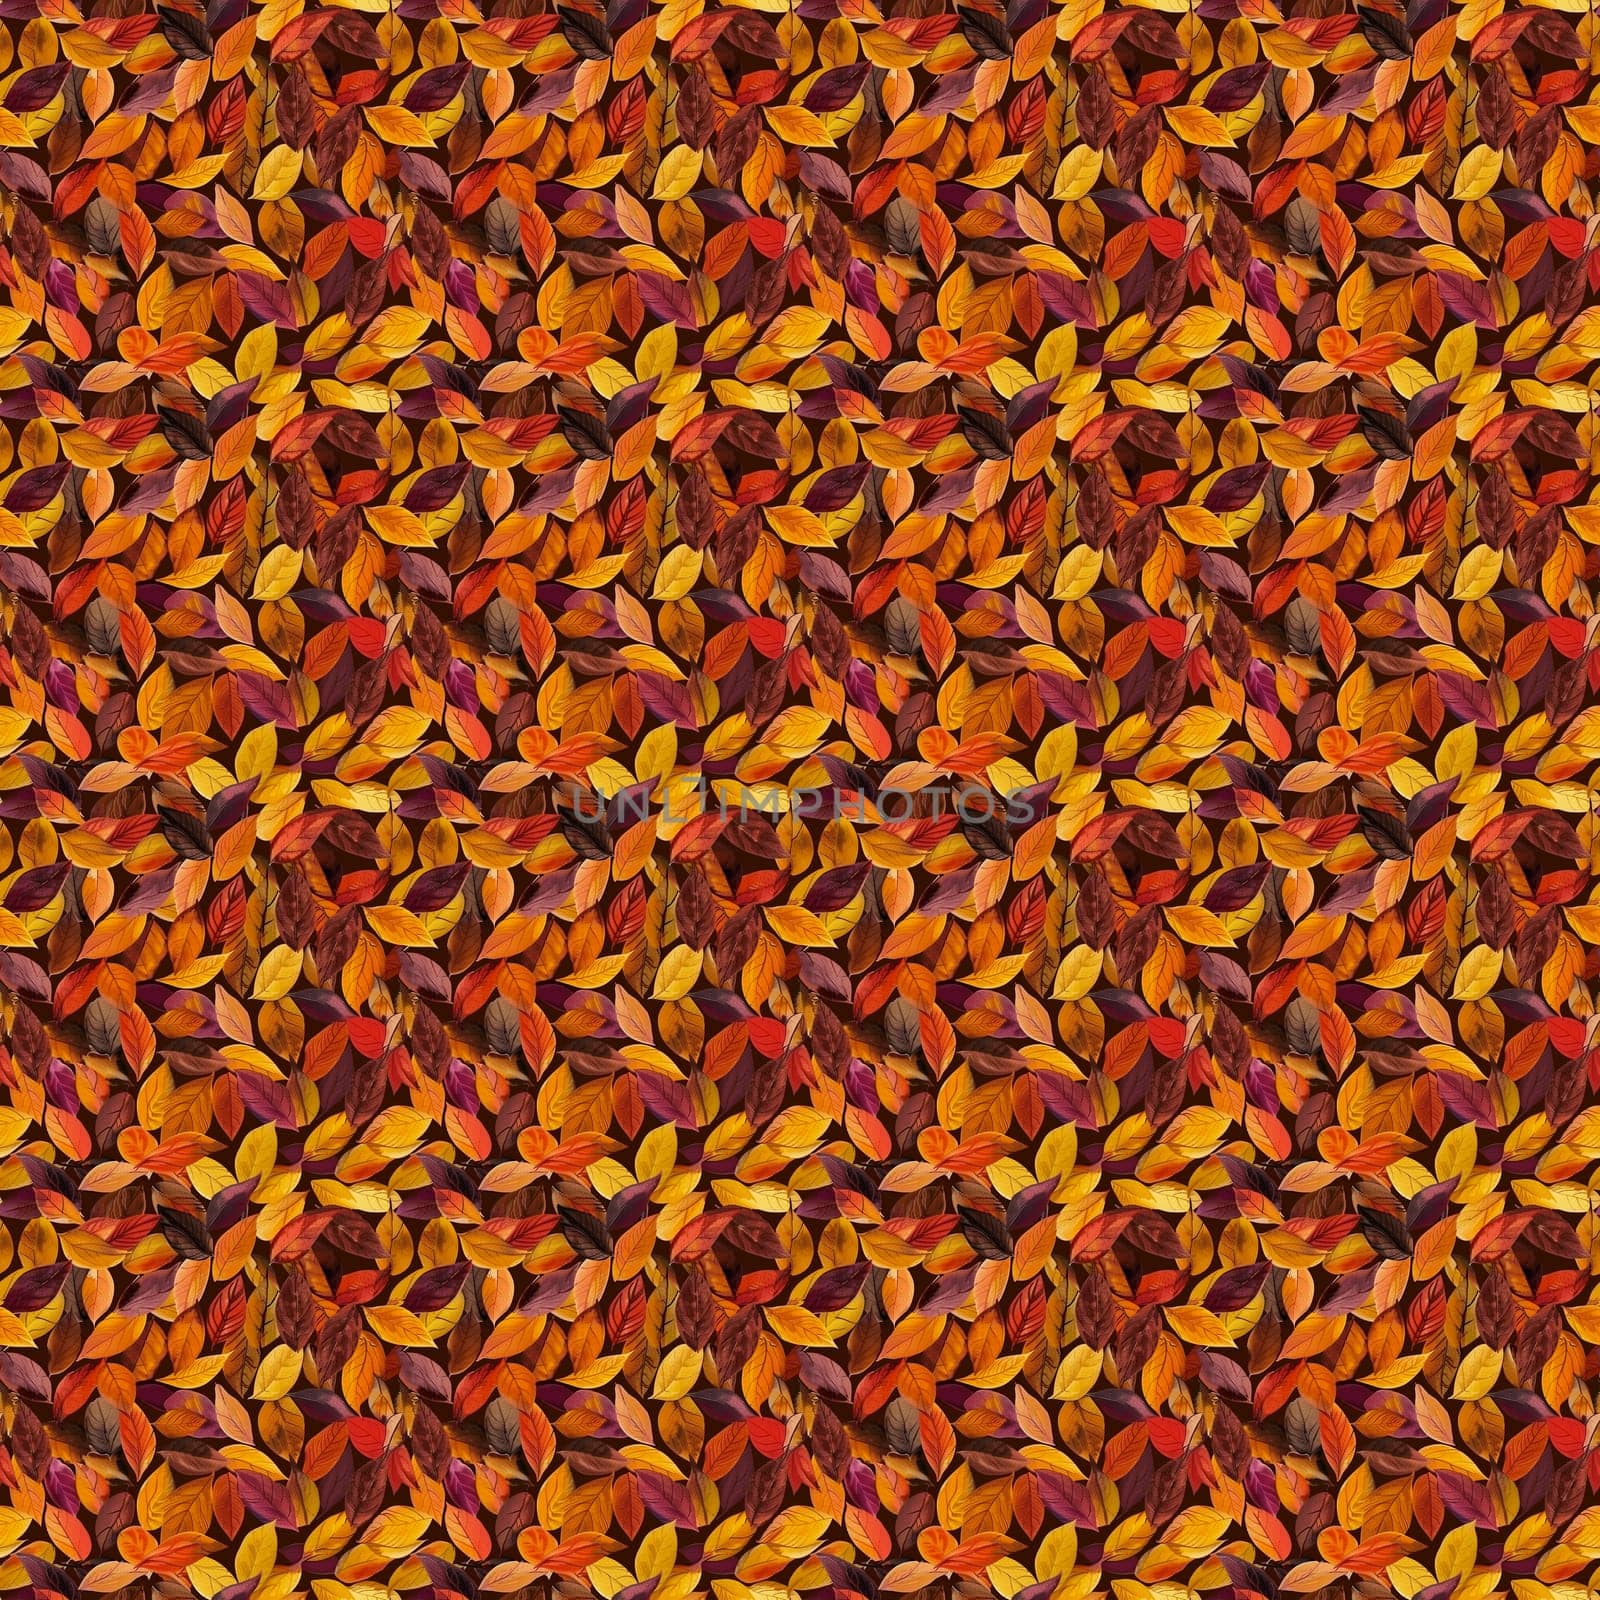 Vibrant seamless pattern of autumn leaves in red, orange, and yellow hues evoking warm, seasonal, nature-inspired design.